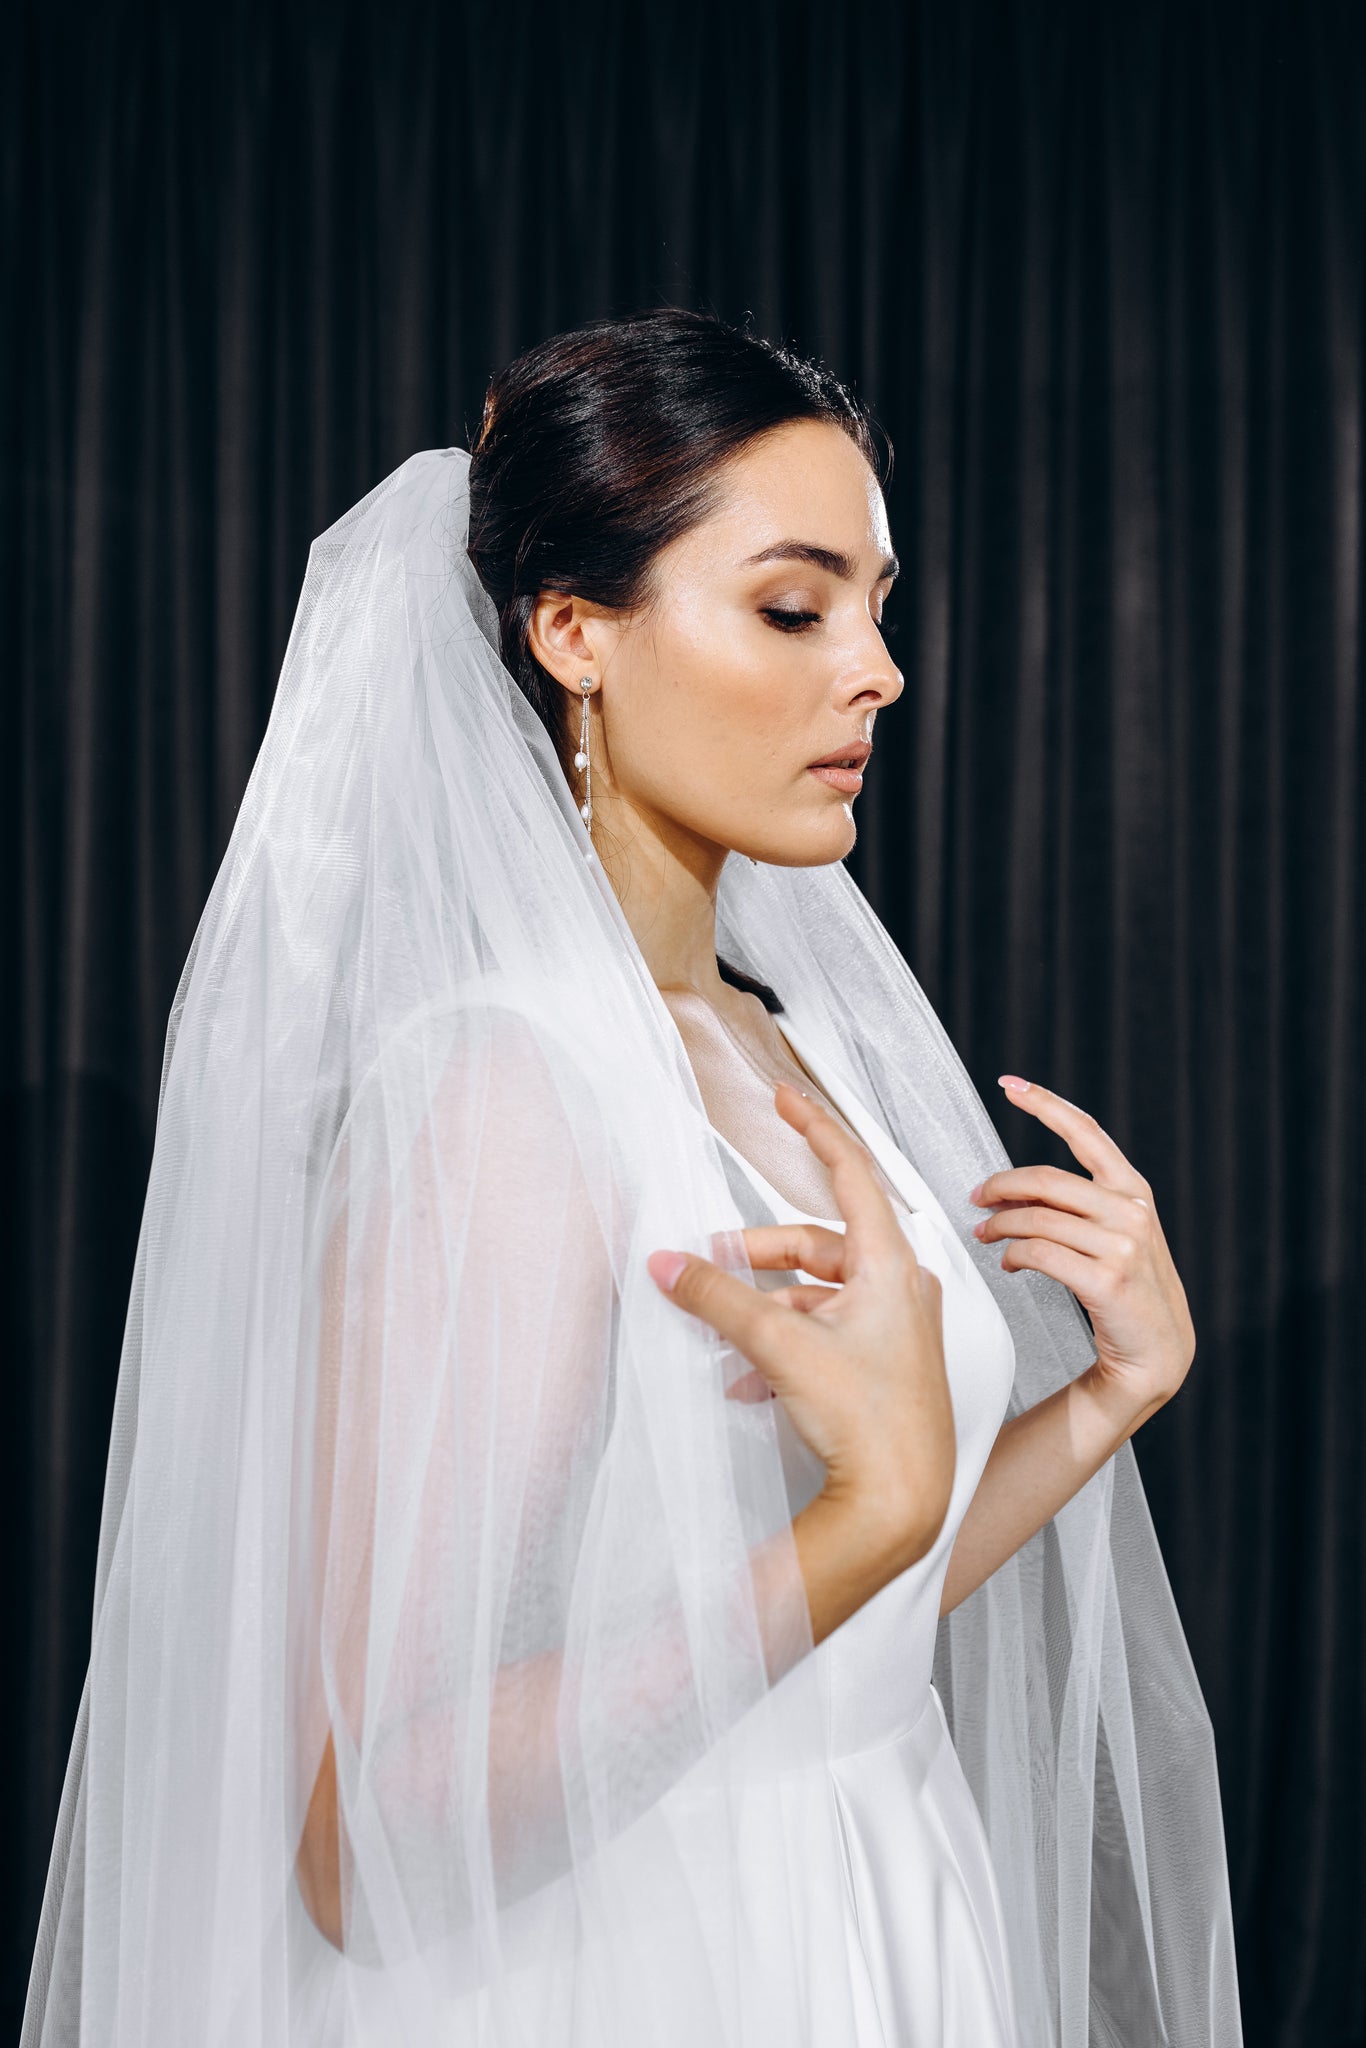 VeroBride Different Sizes Pearl Wedding Veil Light Ivory (in The Photos) / Big Royal - 135 Inches